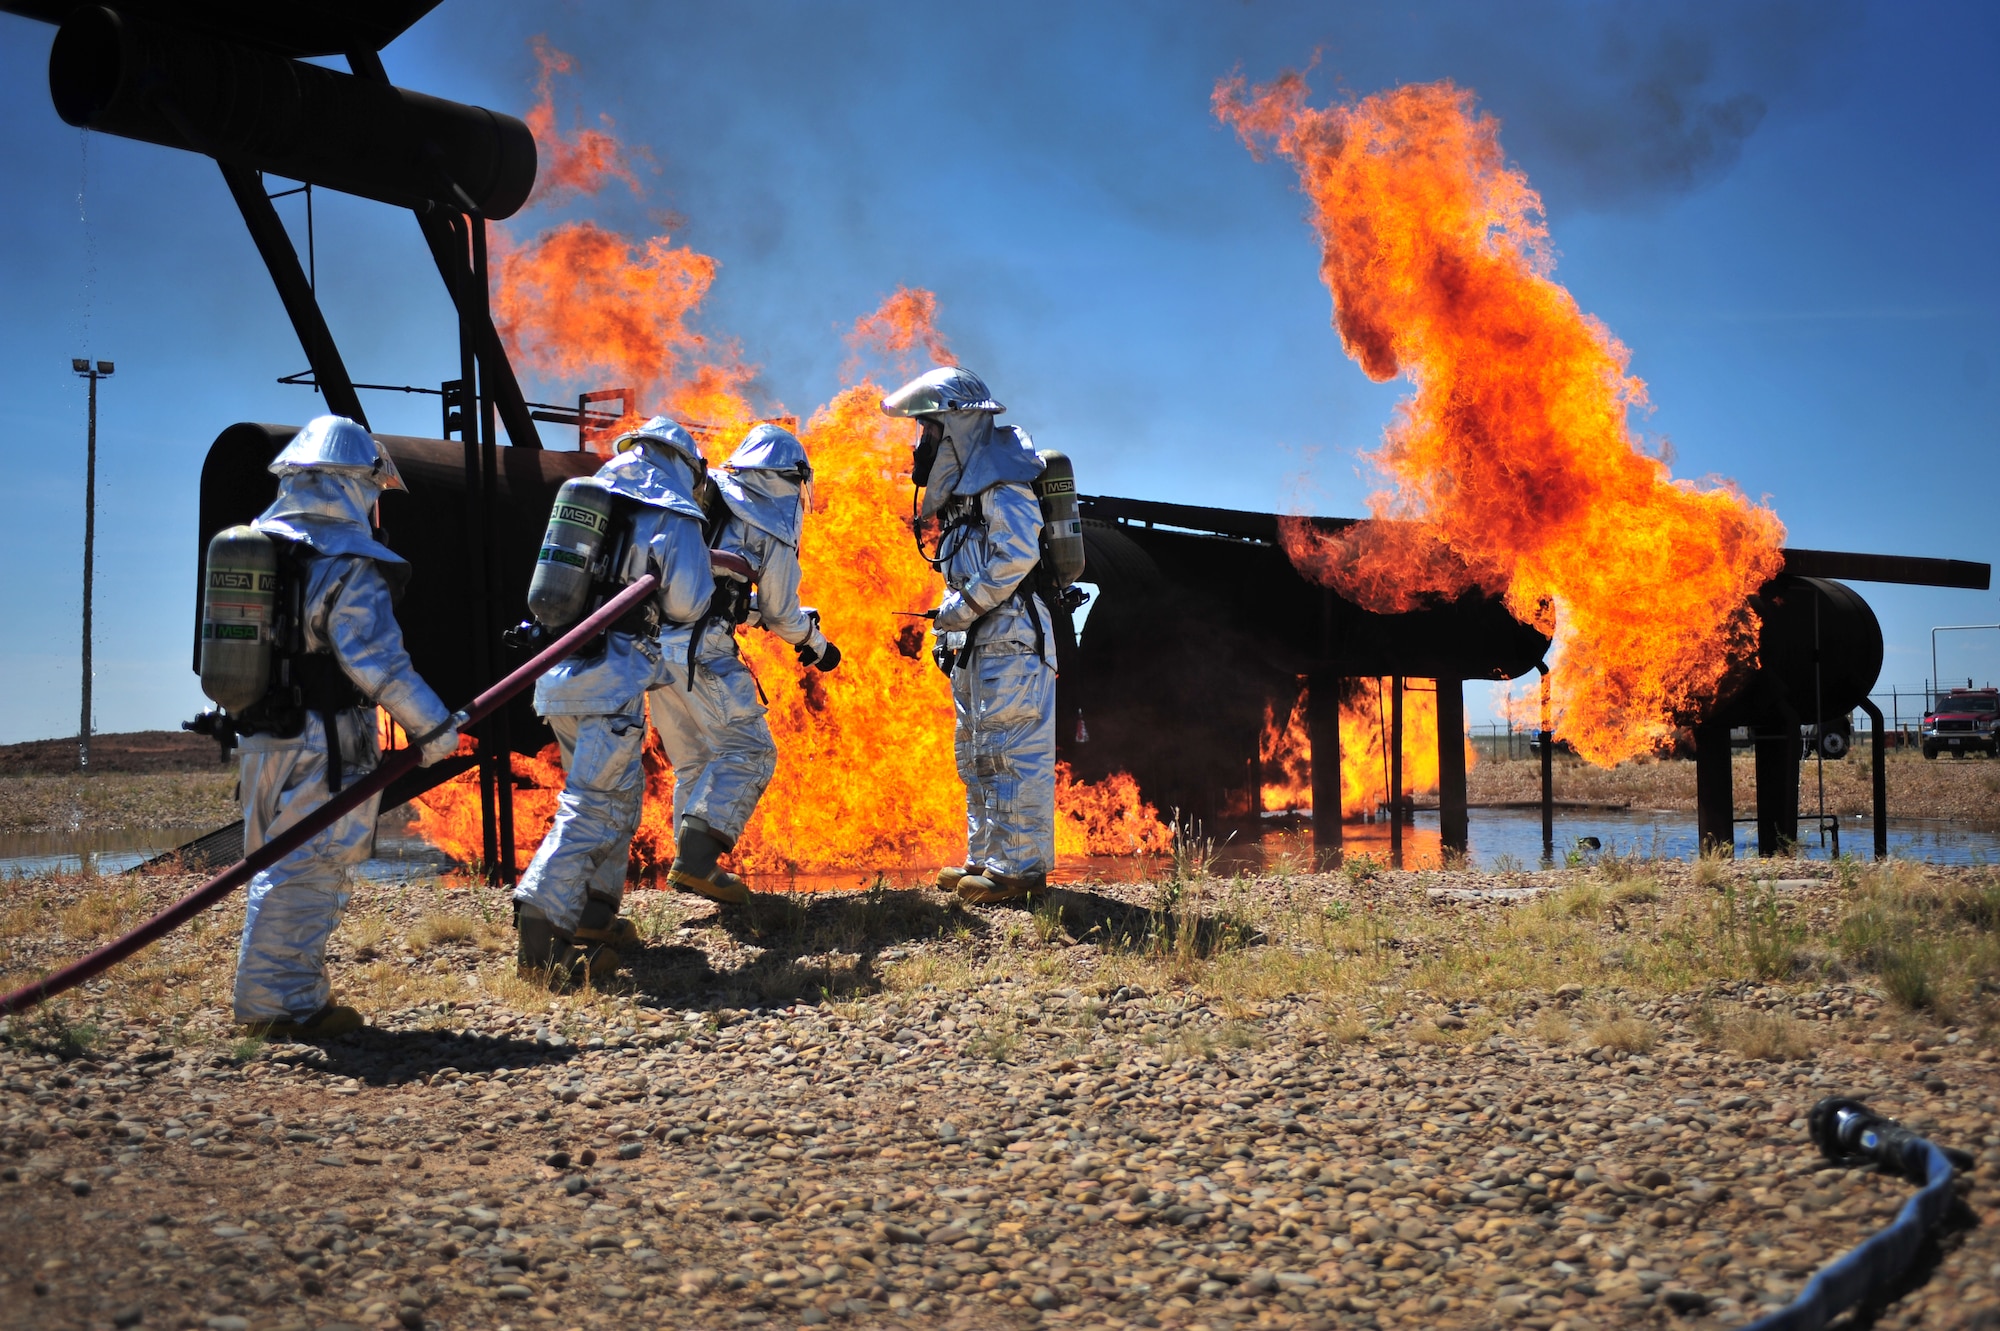 Firefighters with the 27th Special Operations Civil Engineer Squadron discuss strategies before entering the burn pit at Cannon Air Force Base, N.M., Aug. 2, 2012. The pit houses a replicated aircraft equipped with a propane tank and several igniters used to sustain training fires. (U.S. Air Force photo/Airman 1st Class Eboni Reece)